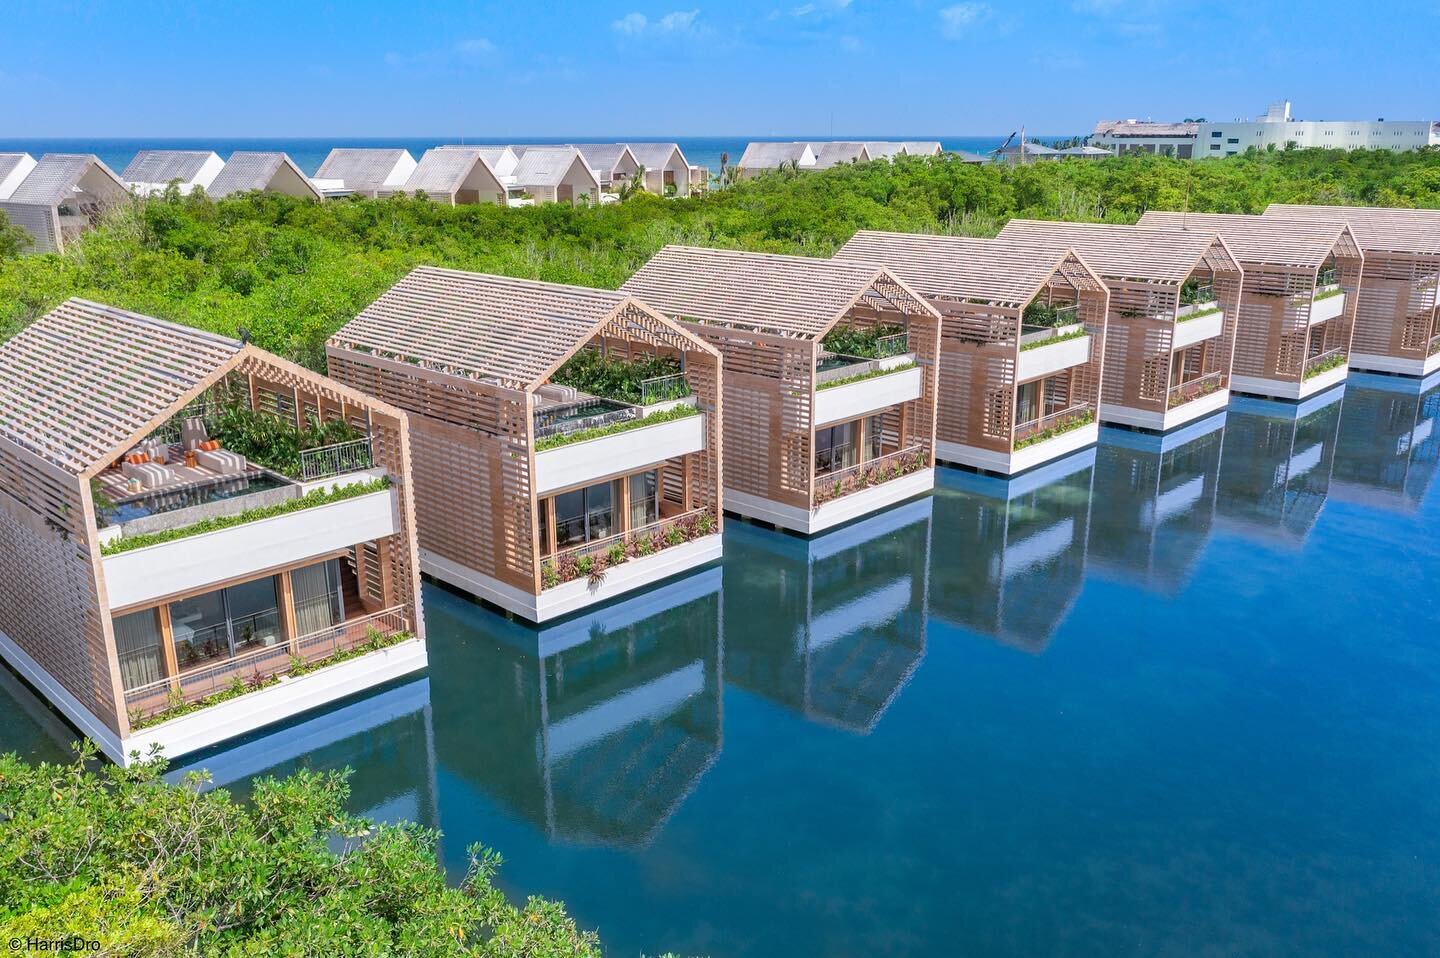 What a place on planet Earth! Loved the swimup villas in Mayakoba! @banyantreemayakoba beautiful resort! Thank you for being a great host! #mexico #playadelcarmen #banyantree #mayakoba #banyantreemayakoba #hotelsandresorts #resortsmagazine #luxurylif